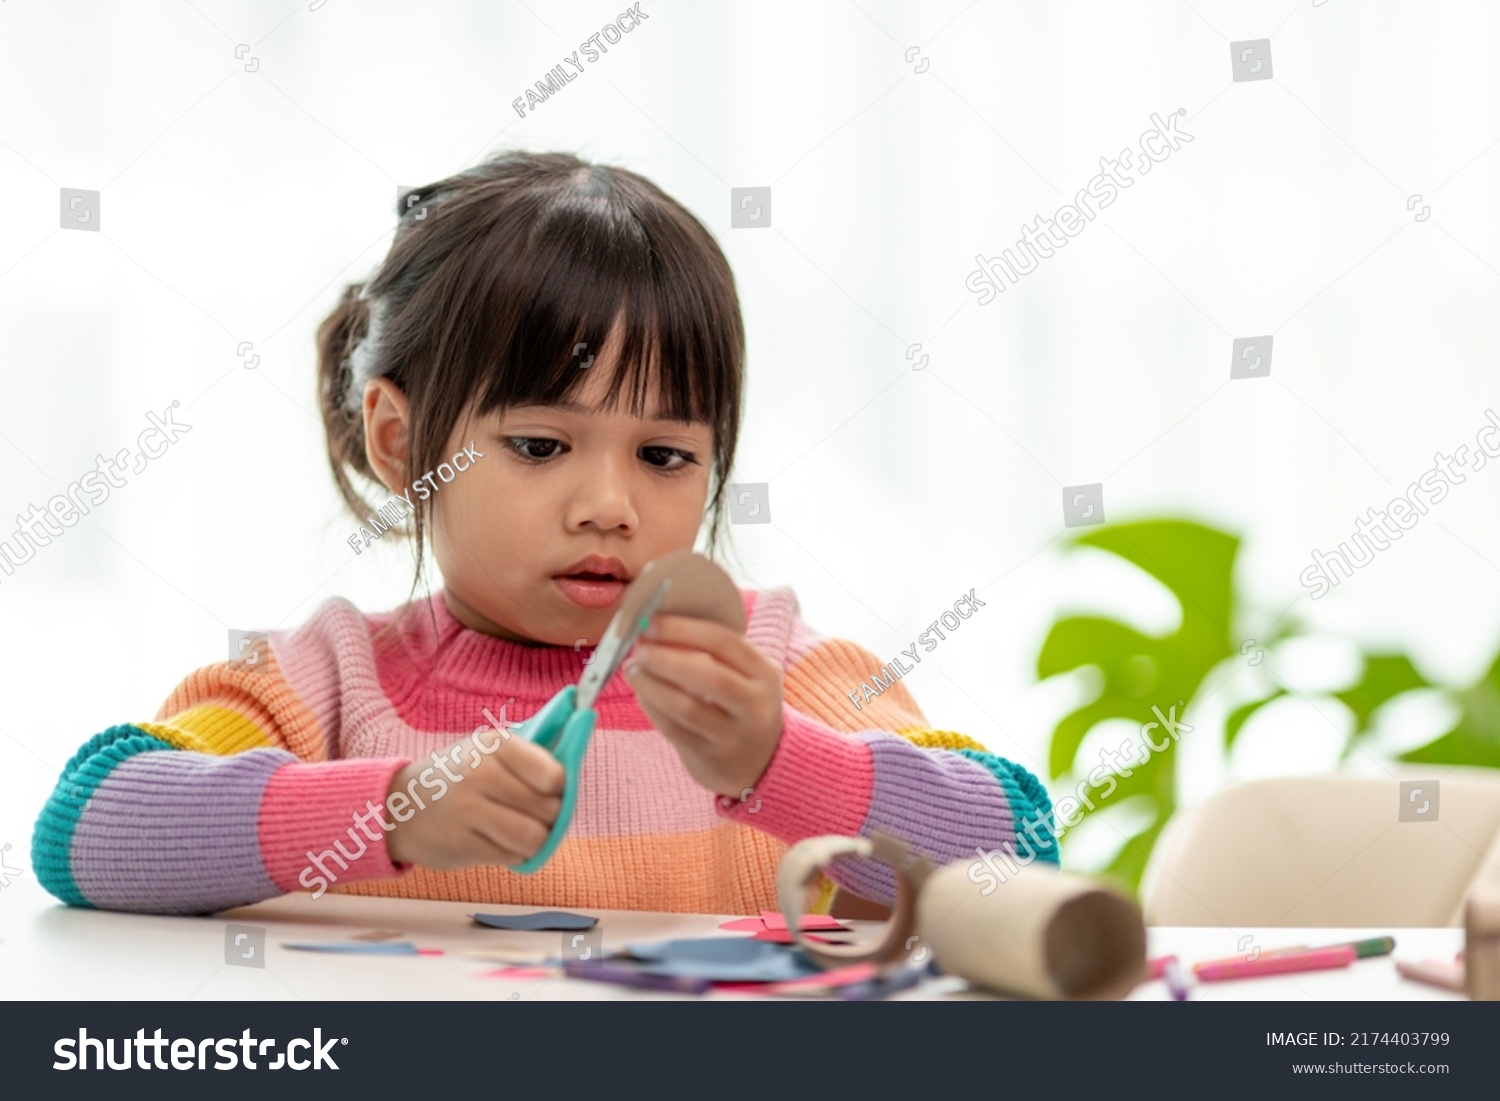 Portrait of a little asian girl cutting a paper in activities on DIY class at School.Scissors cut paper. #2174403799